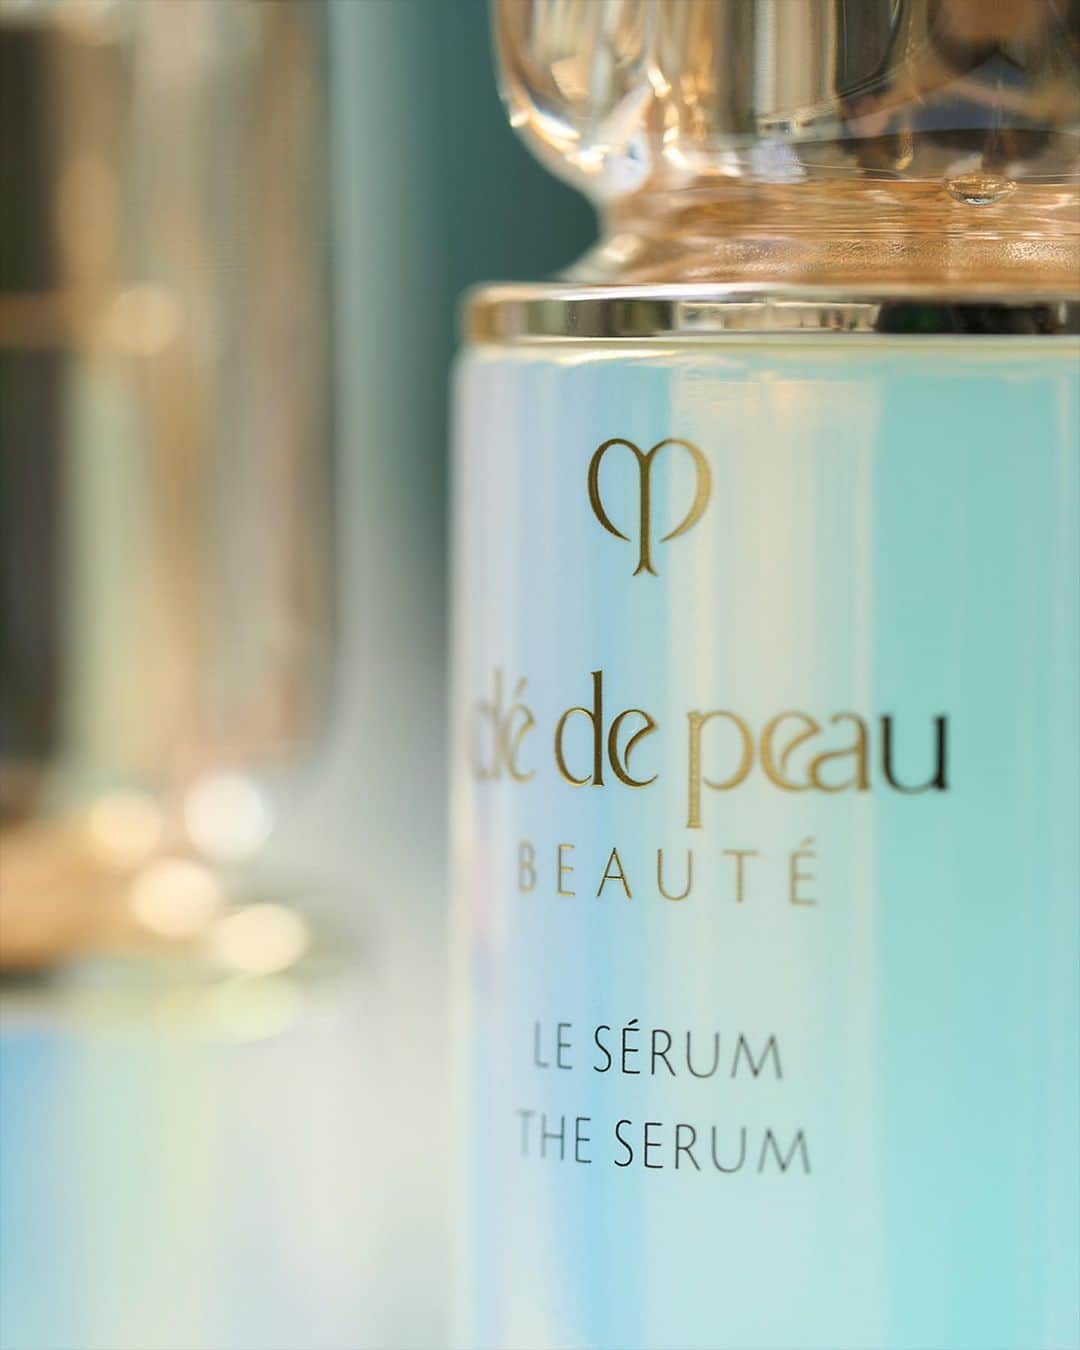 Clé de Peau Beauté Officialさんのインスタグラム写真 - (Clé de Peau Beauté OfficialInstagram)「Join us in celebrating an incredible milestone – more than 3 million bottles of #TheSerum sold worldwide! 🎉 From its groundbreaking launch 10 years ago to becoming a global sensation, The Serum continues to be the epitome of cutting-edge innovation and luxurious skincare. Starring ingredients such as Kelplex to activate your skin’s regenerative powers and Skin Empowering Illuminator to enhance your skin’s natural defense abilities, this powerful elixir is the secret to youthful, radiant skin every day.  If you haven’t experienced the magic of The Serum yet, now is the perfect time to join our radiant family ✨  私たちのアイコンであるクレ・ド・ポー ボーテ #ルセラム （医薬部外品）の販売数が全世界で300万本を突破しました！🎉 先進のテクノロジーとラグジュアリーなスキンケアを兼ね備えたル・セラムは、10年前に発売してから各国でご好評をいただいています。  瞬時に肌へなじみ、なめらかさを極めたふっくらやわらかな肌へ導く美容液です。 〇美しい色彩を帯びたさまざまな種類の海藻から豊かな海の恵みを抽出し、繊 細なバランスでブレンドしたケルプレックス GL（保湿）を配合。（海藻エキス、グリセリン)。 〇スキンイルミネイターを配合。（保湿・整肌）（加水分解シルク、加水分解コンキオリン、テアニン、トウキエキス、シソエキス、グリシン、グリセリン、 PEG/PPG‐14/7 ジメチルエーテル、トレハロース）  まだル・セラムを体験したことのない方は、ぜひこの機会に試してみてください✨」9月5日 13時00分 - cledepeaubeaute